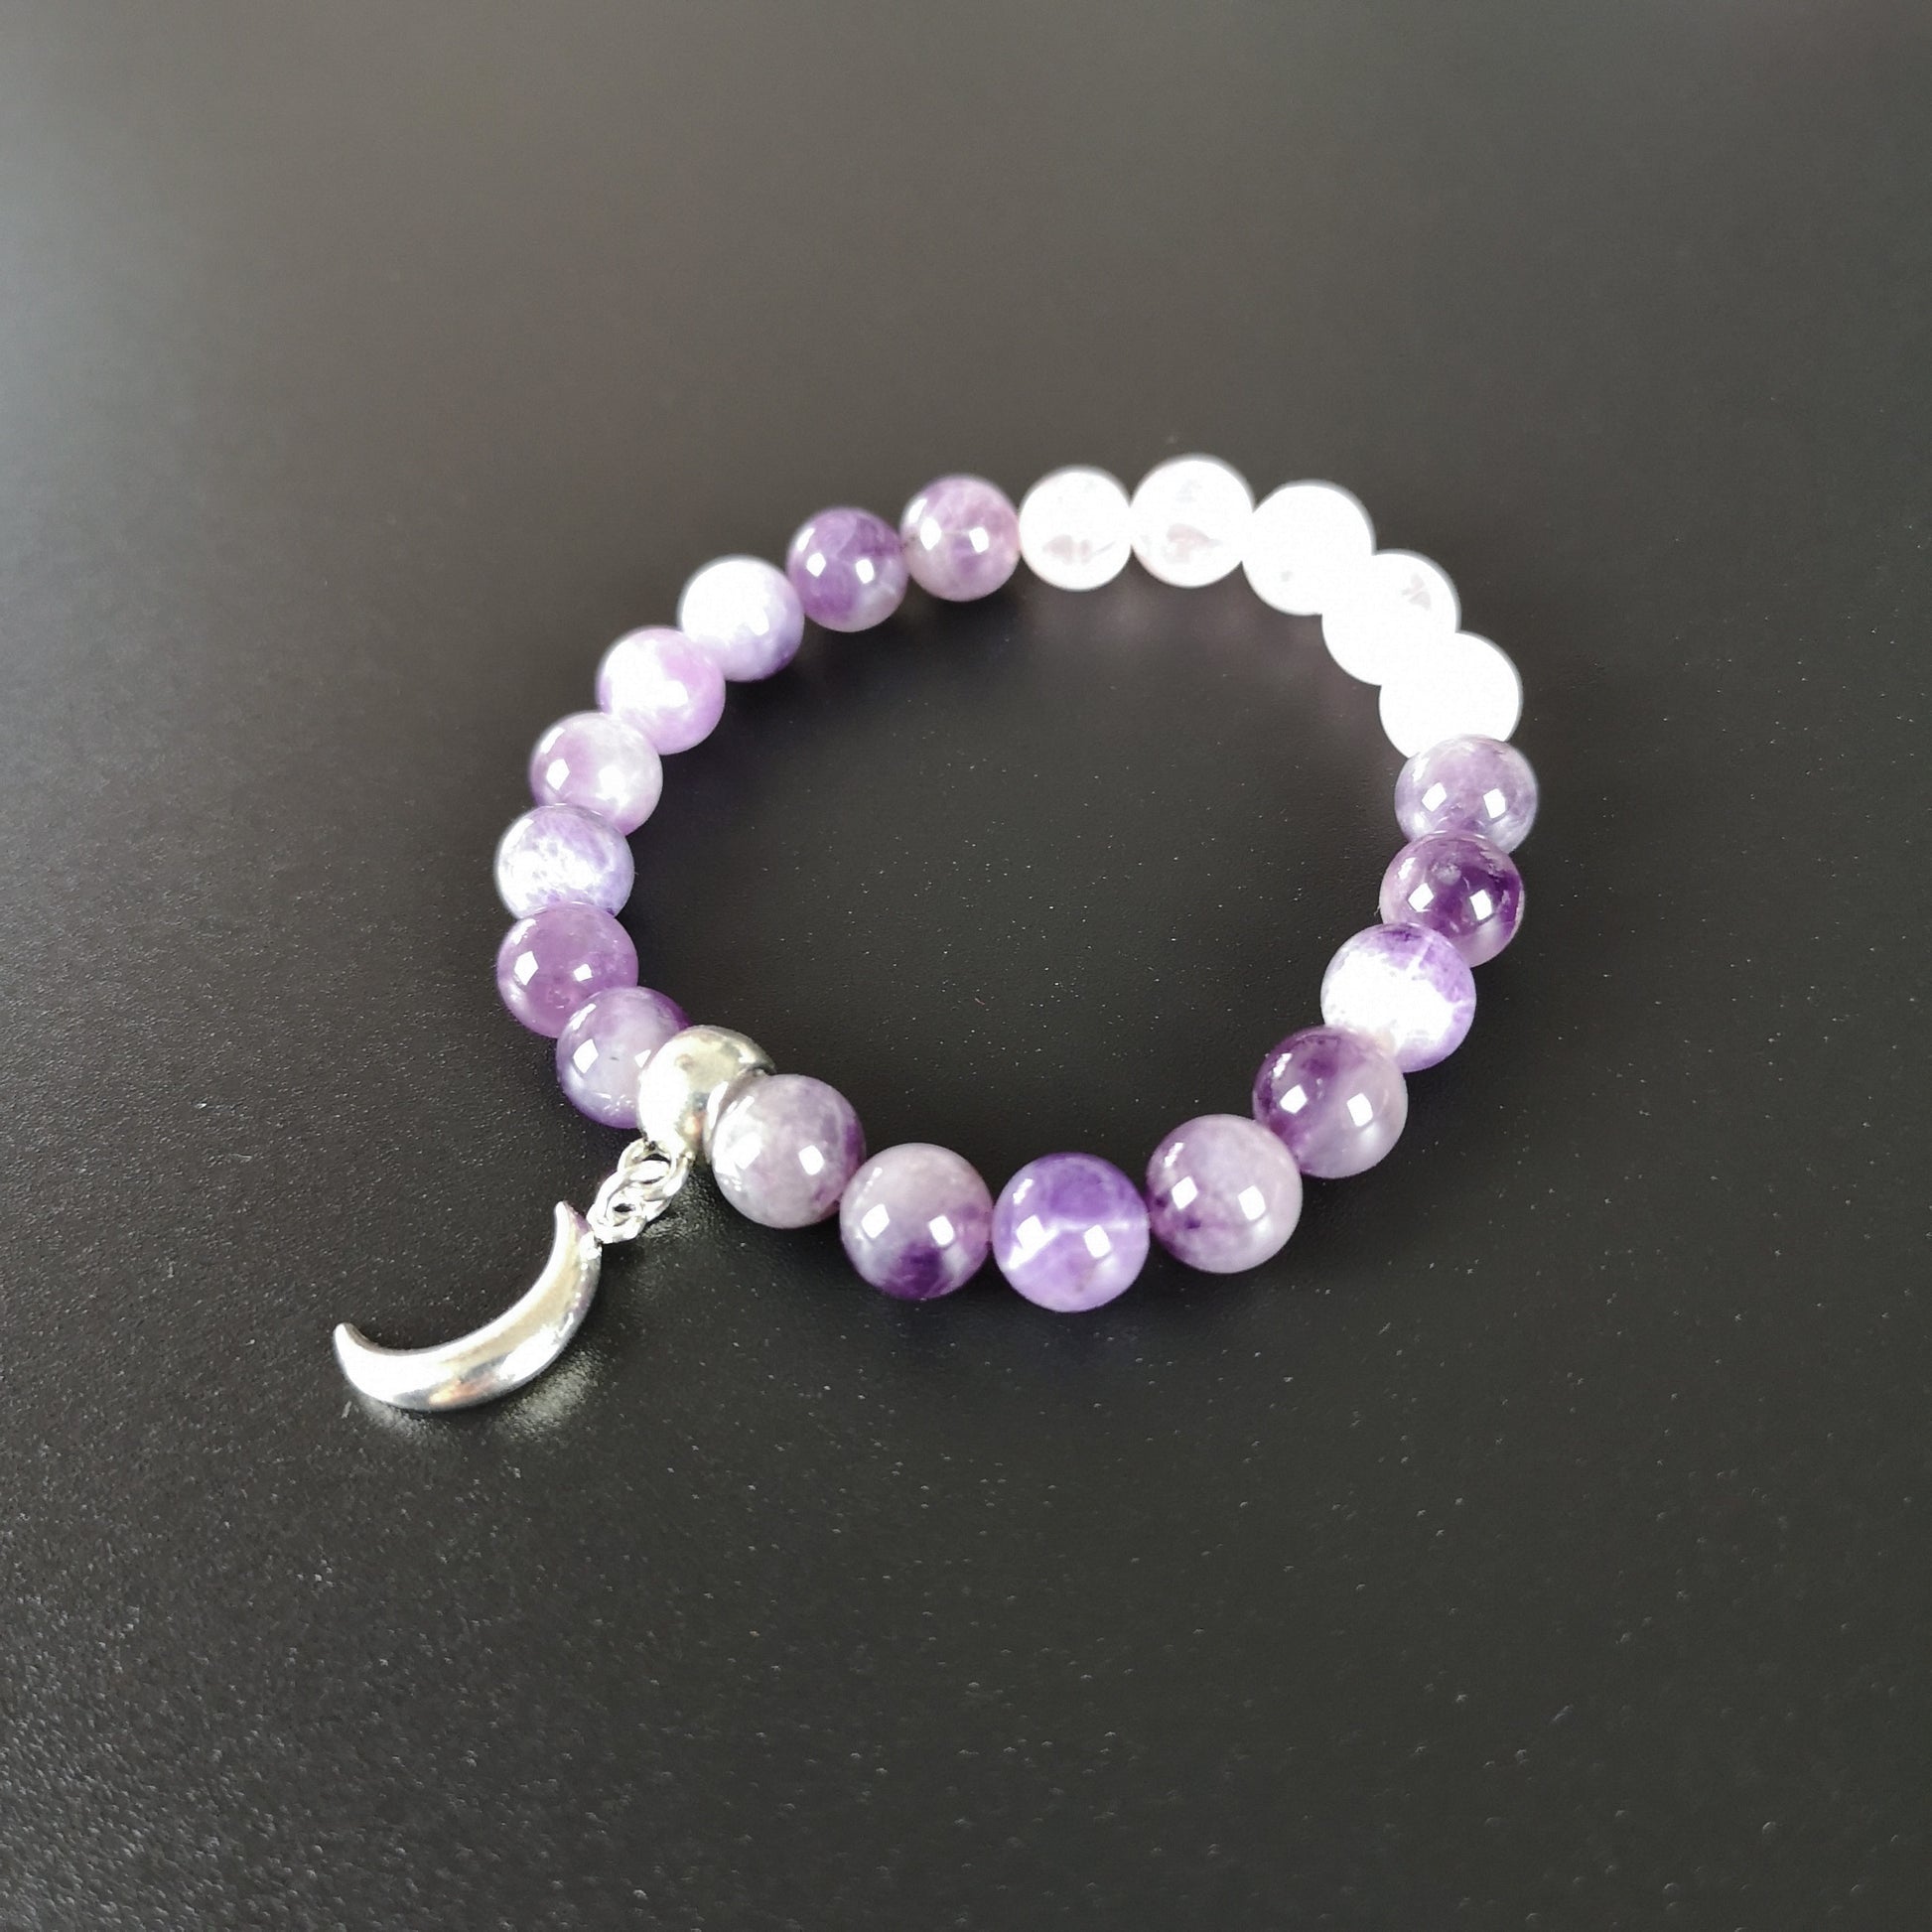 Amethyst and rose quartz mala beaded bracelet with a crescent moon charm - 18 cm - The French Witch shop